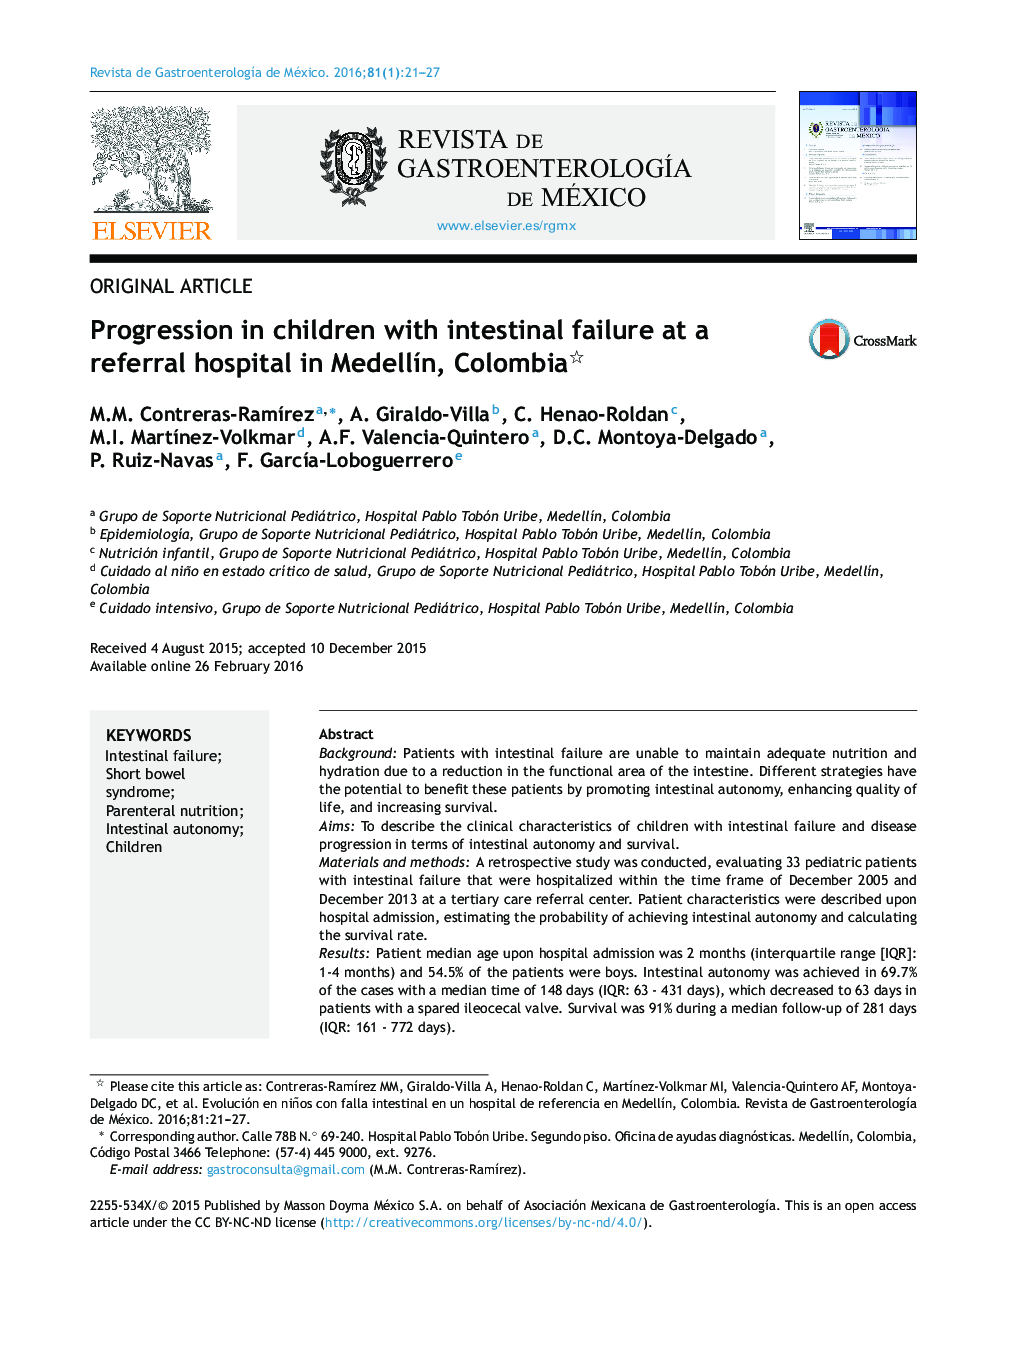 Progression in children with intestinal failure at a referral hospital in Medellín, Colombia 